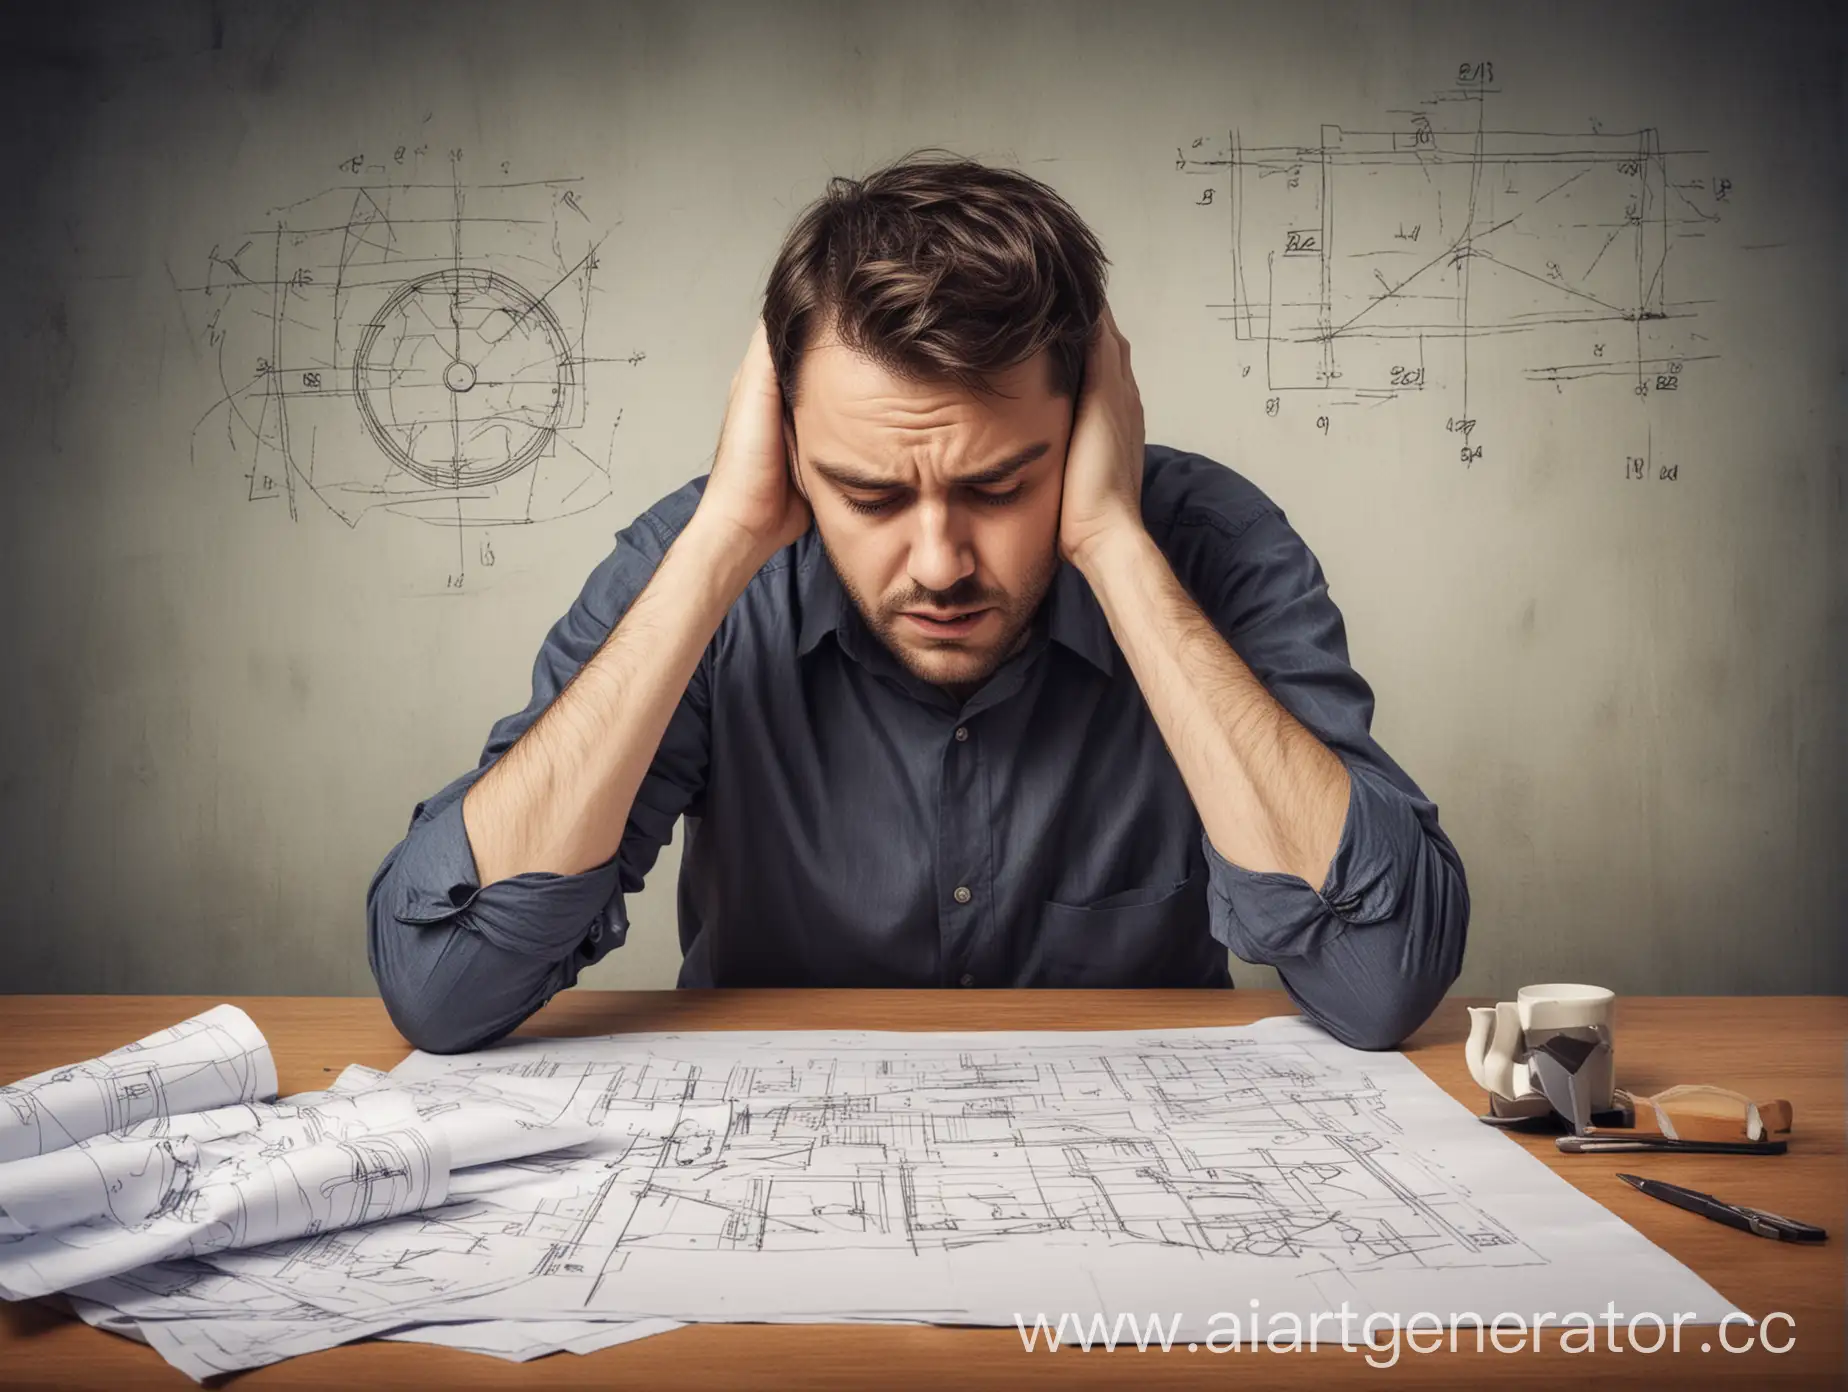 Exhausted-Man-Working-with-Project-Blueprints-Symbolizing-Routine-and-Errors